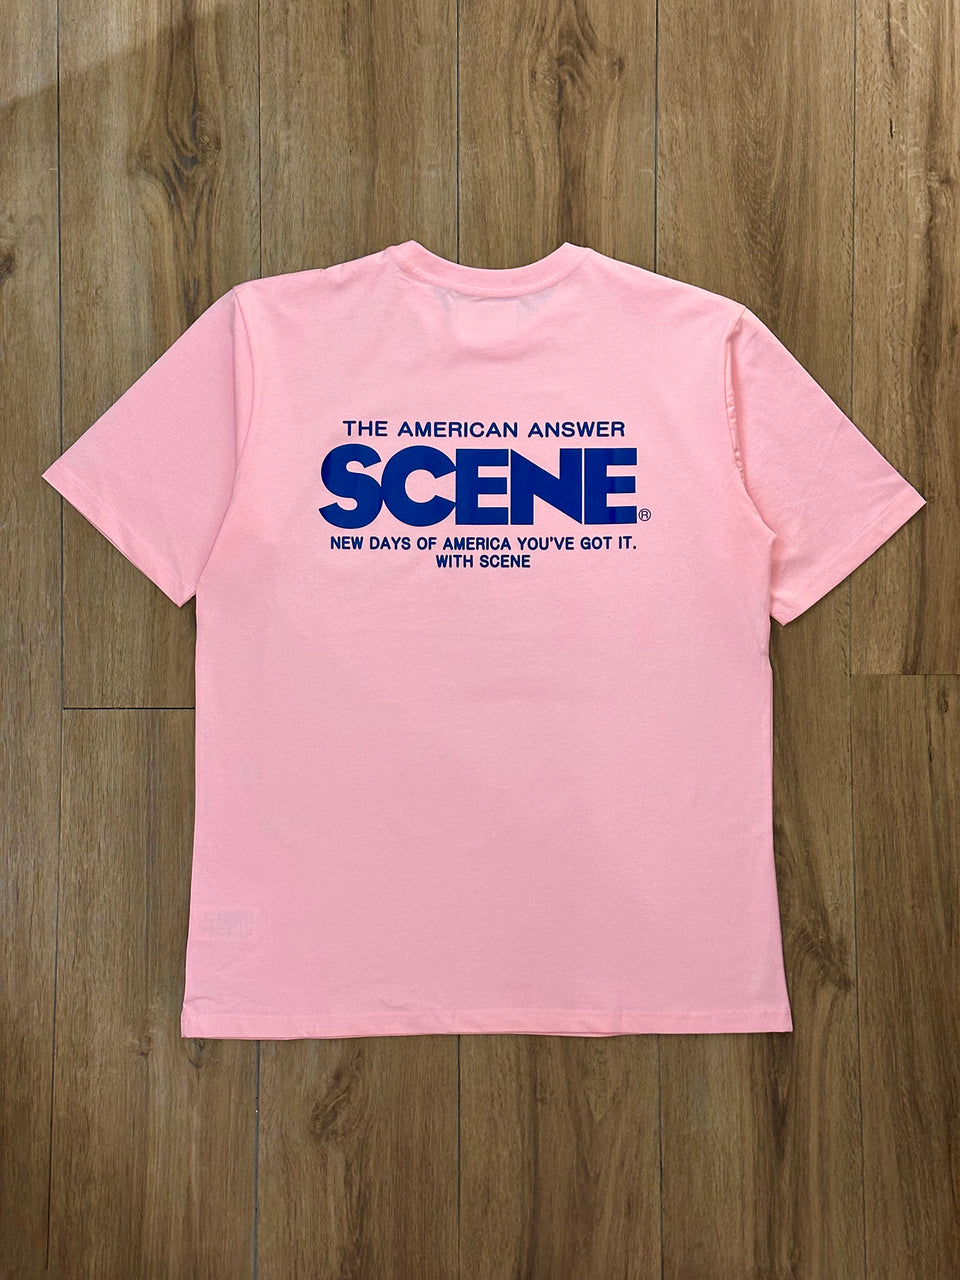 Scene Classic T-shirt - nnb limited pink